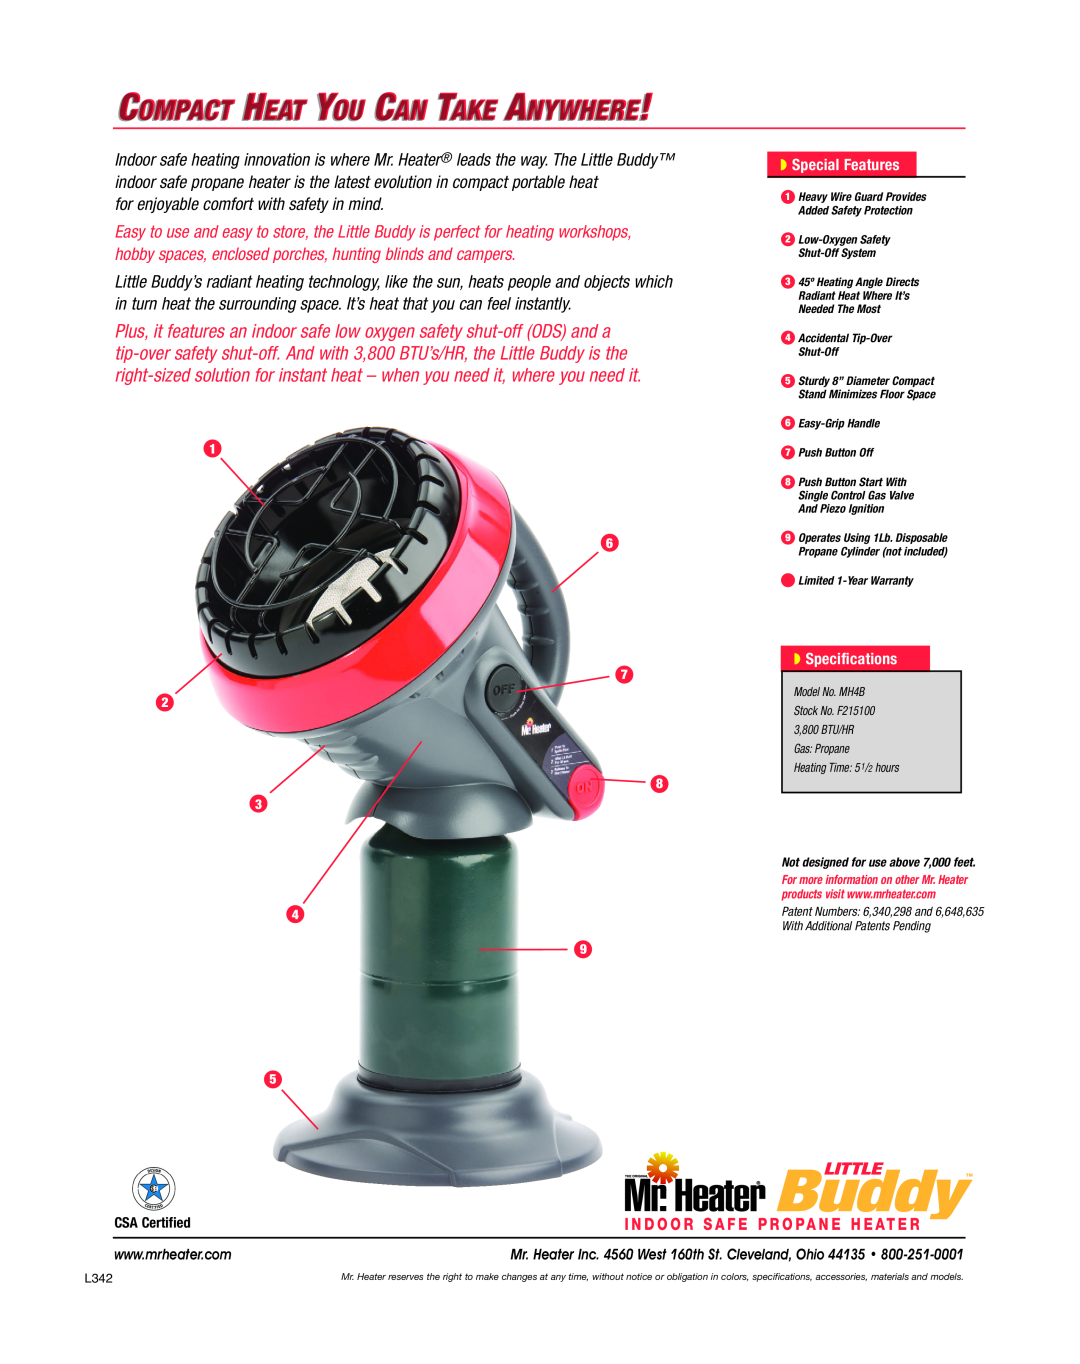 Mr. Heater MH4B manual Compact Heat You Can Take Anywhere, for enjoyable comfort with safety in mind, Special Features 